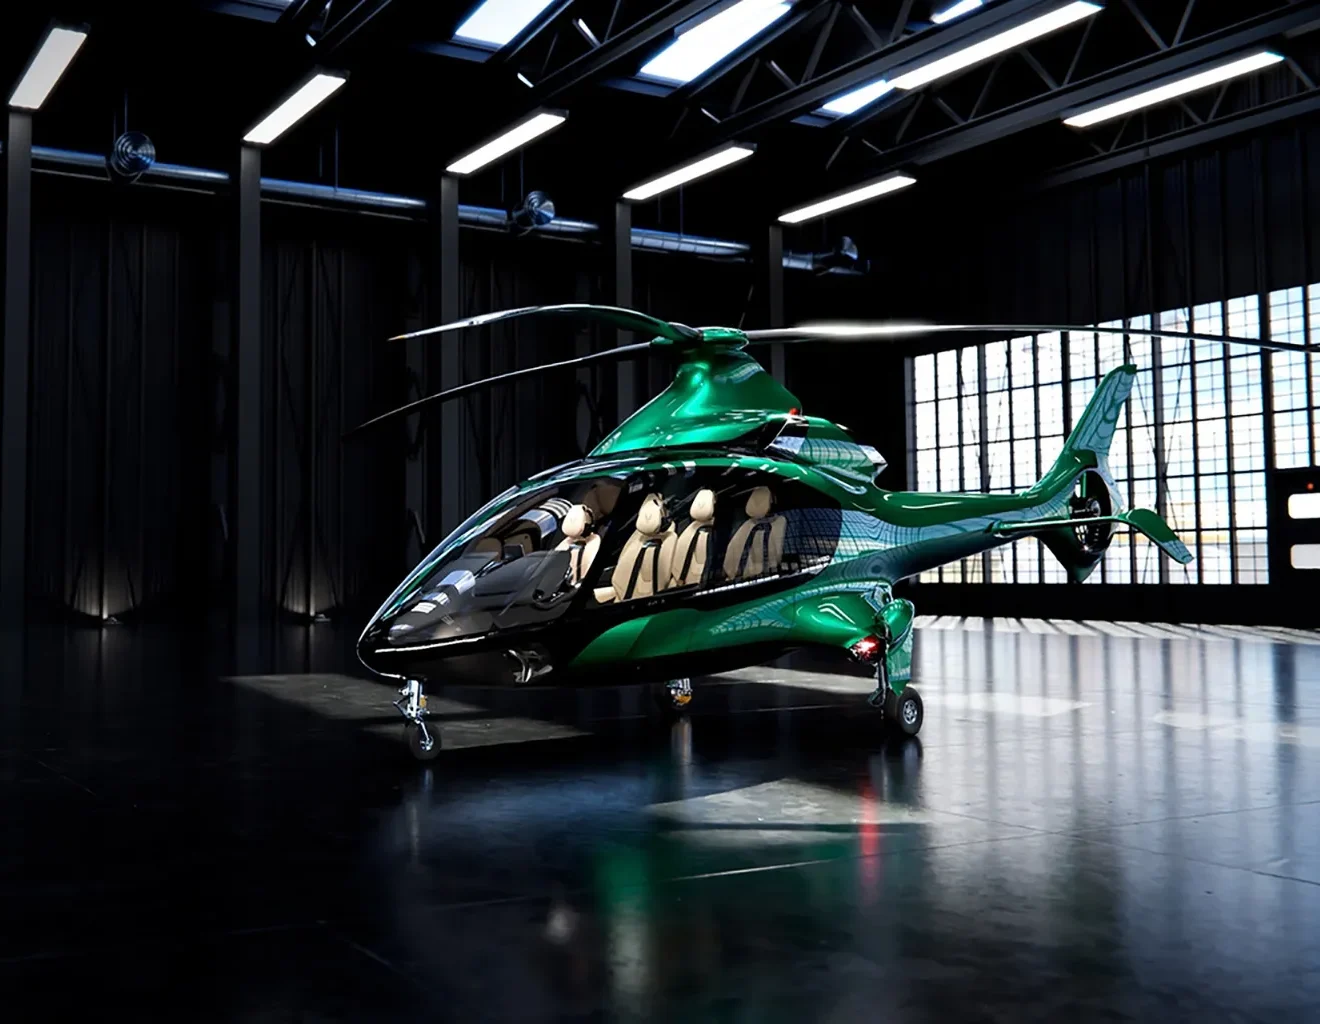 hill hx50 helicopter